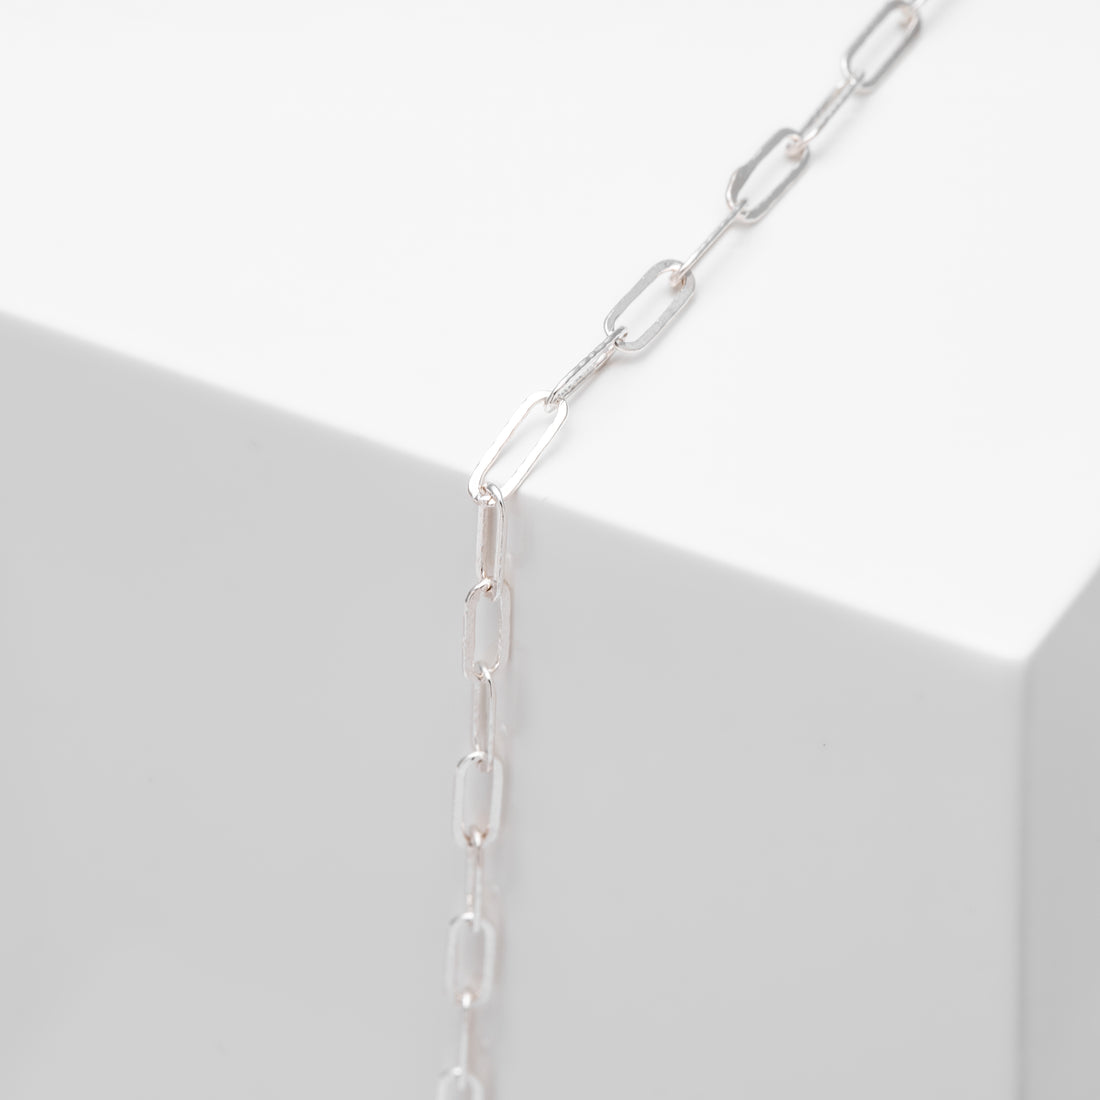 paper clip chain in 14k gold filled or sterling silver